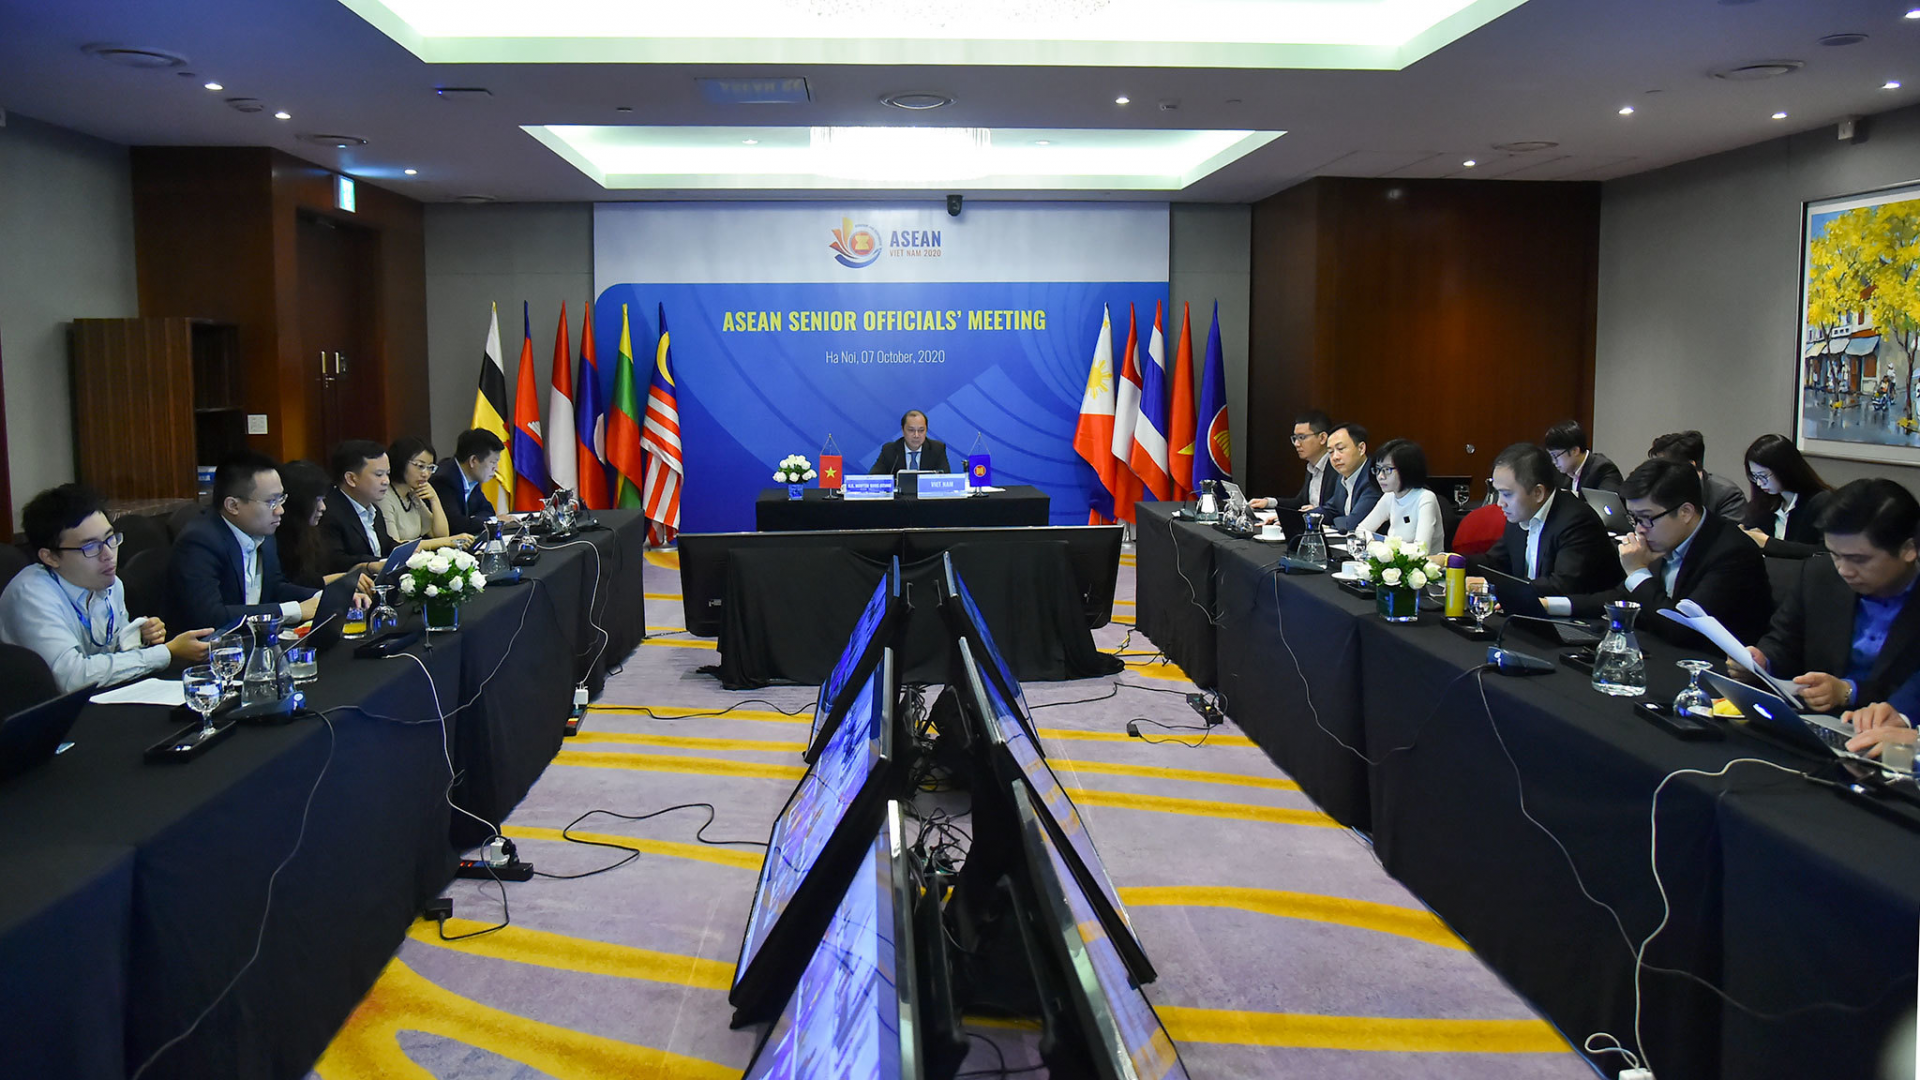 asean pledges to coordinate with china to soon complete talks for code of conduct in south china sea bien dong sea